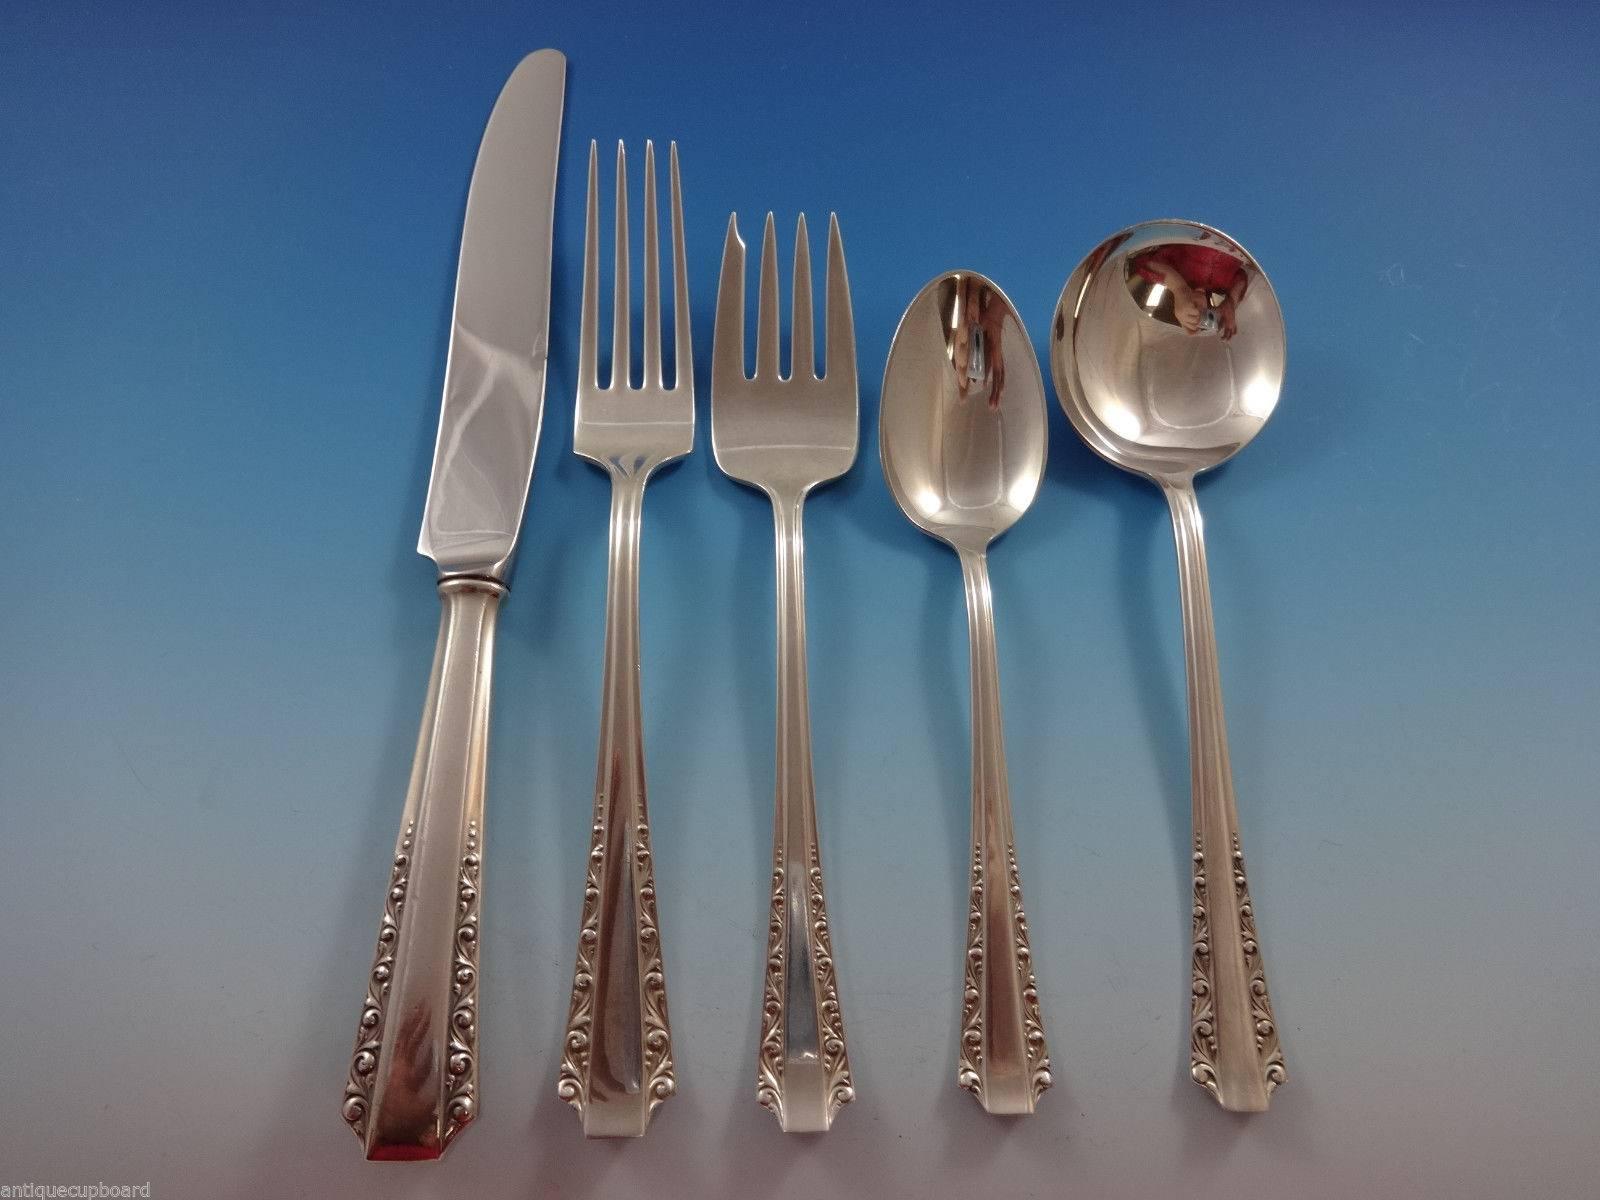 Stunning American Colonial by Amston sterling silver flatware set of 60 pieces. 
This set includes: 12 knives, 8 7/8